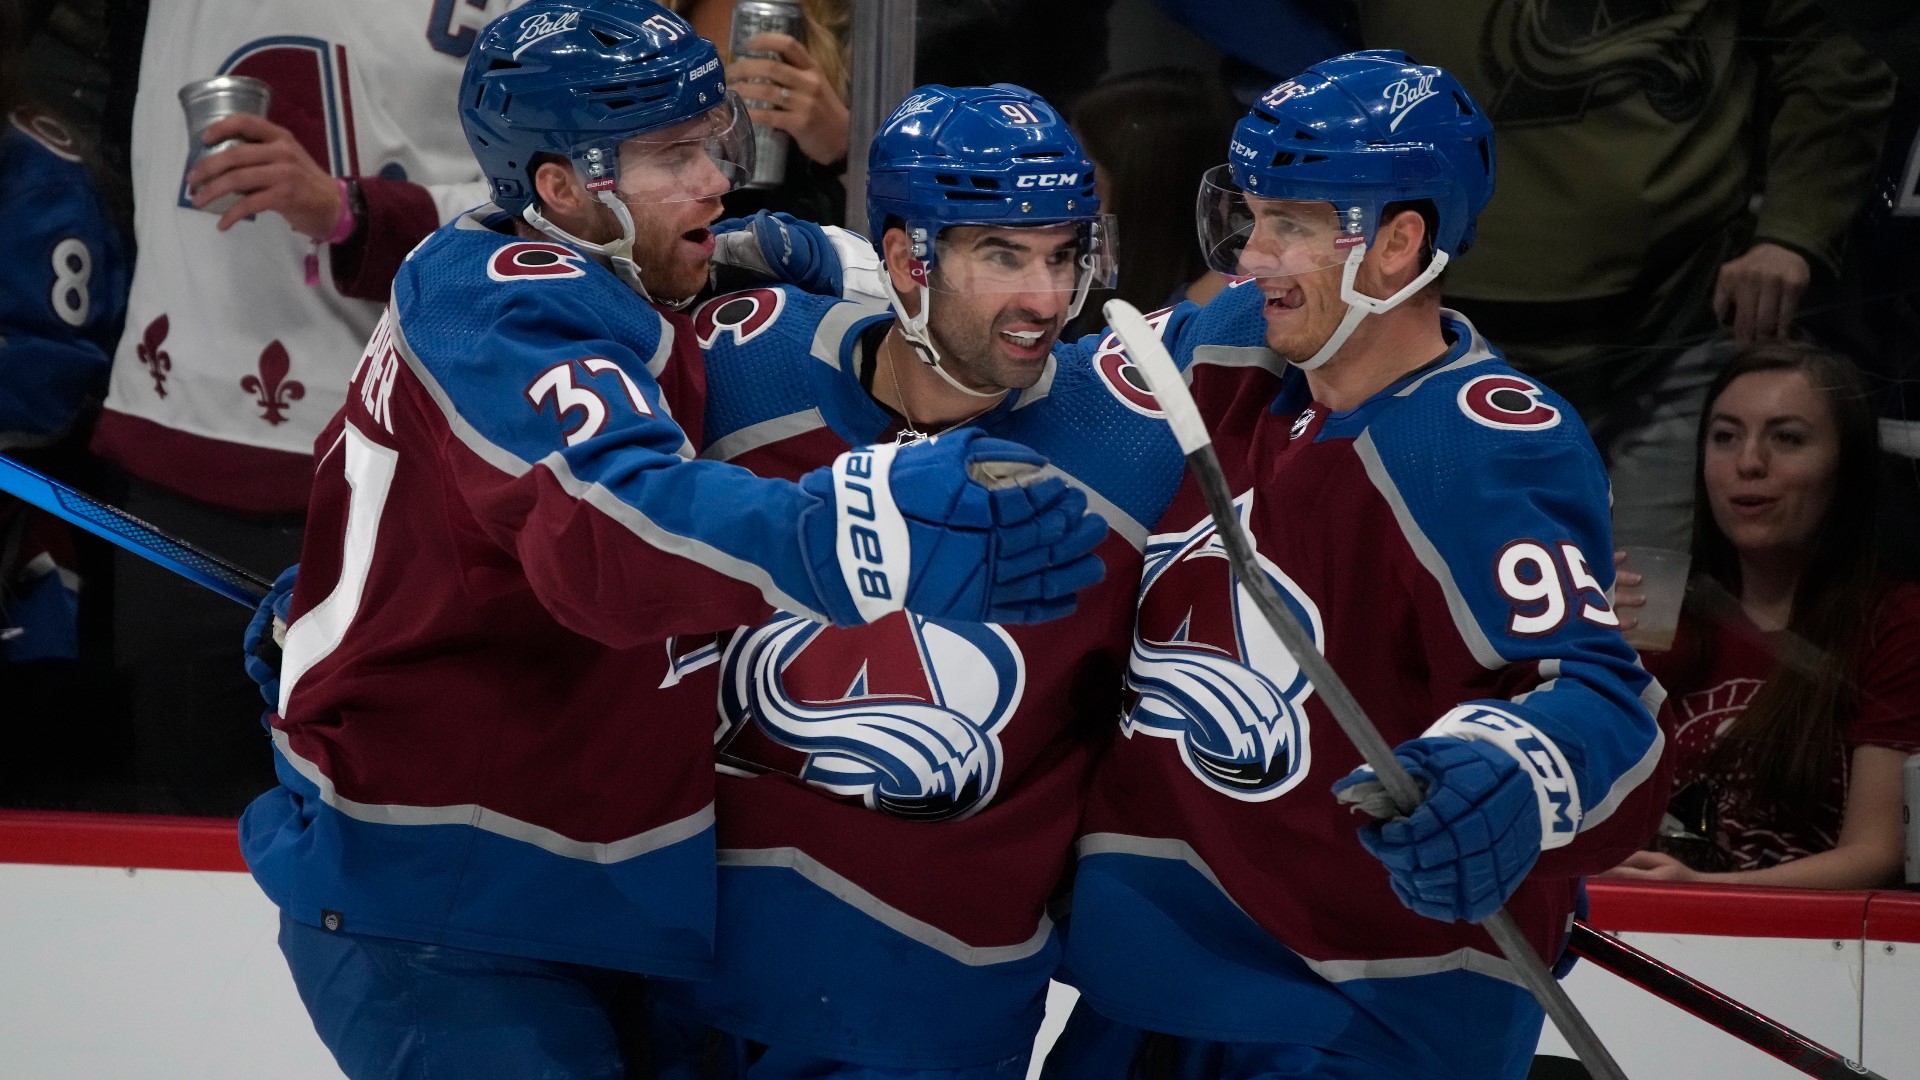 After missing most of the playoffs last season with an eight-game suspension, Kadri is dedicated to improving his game and leadership with the Avalanche.